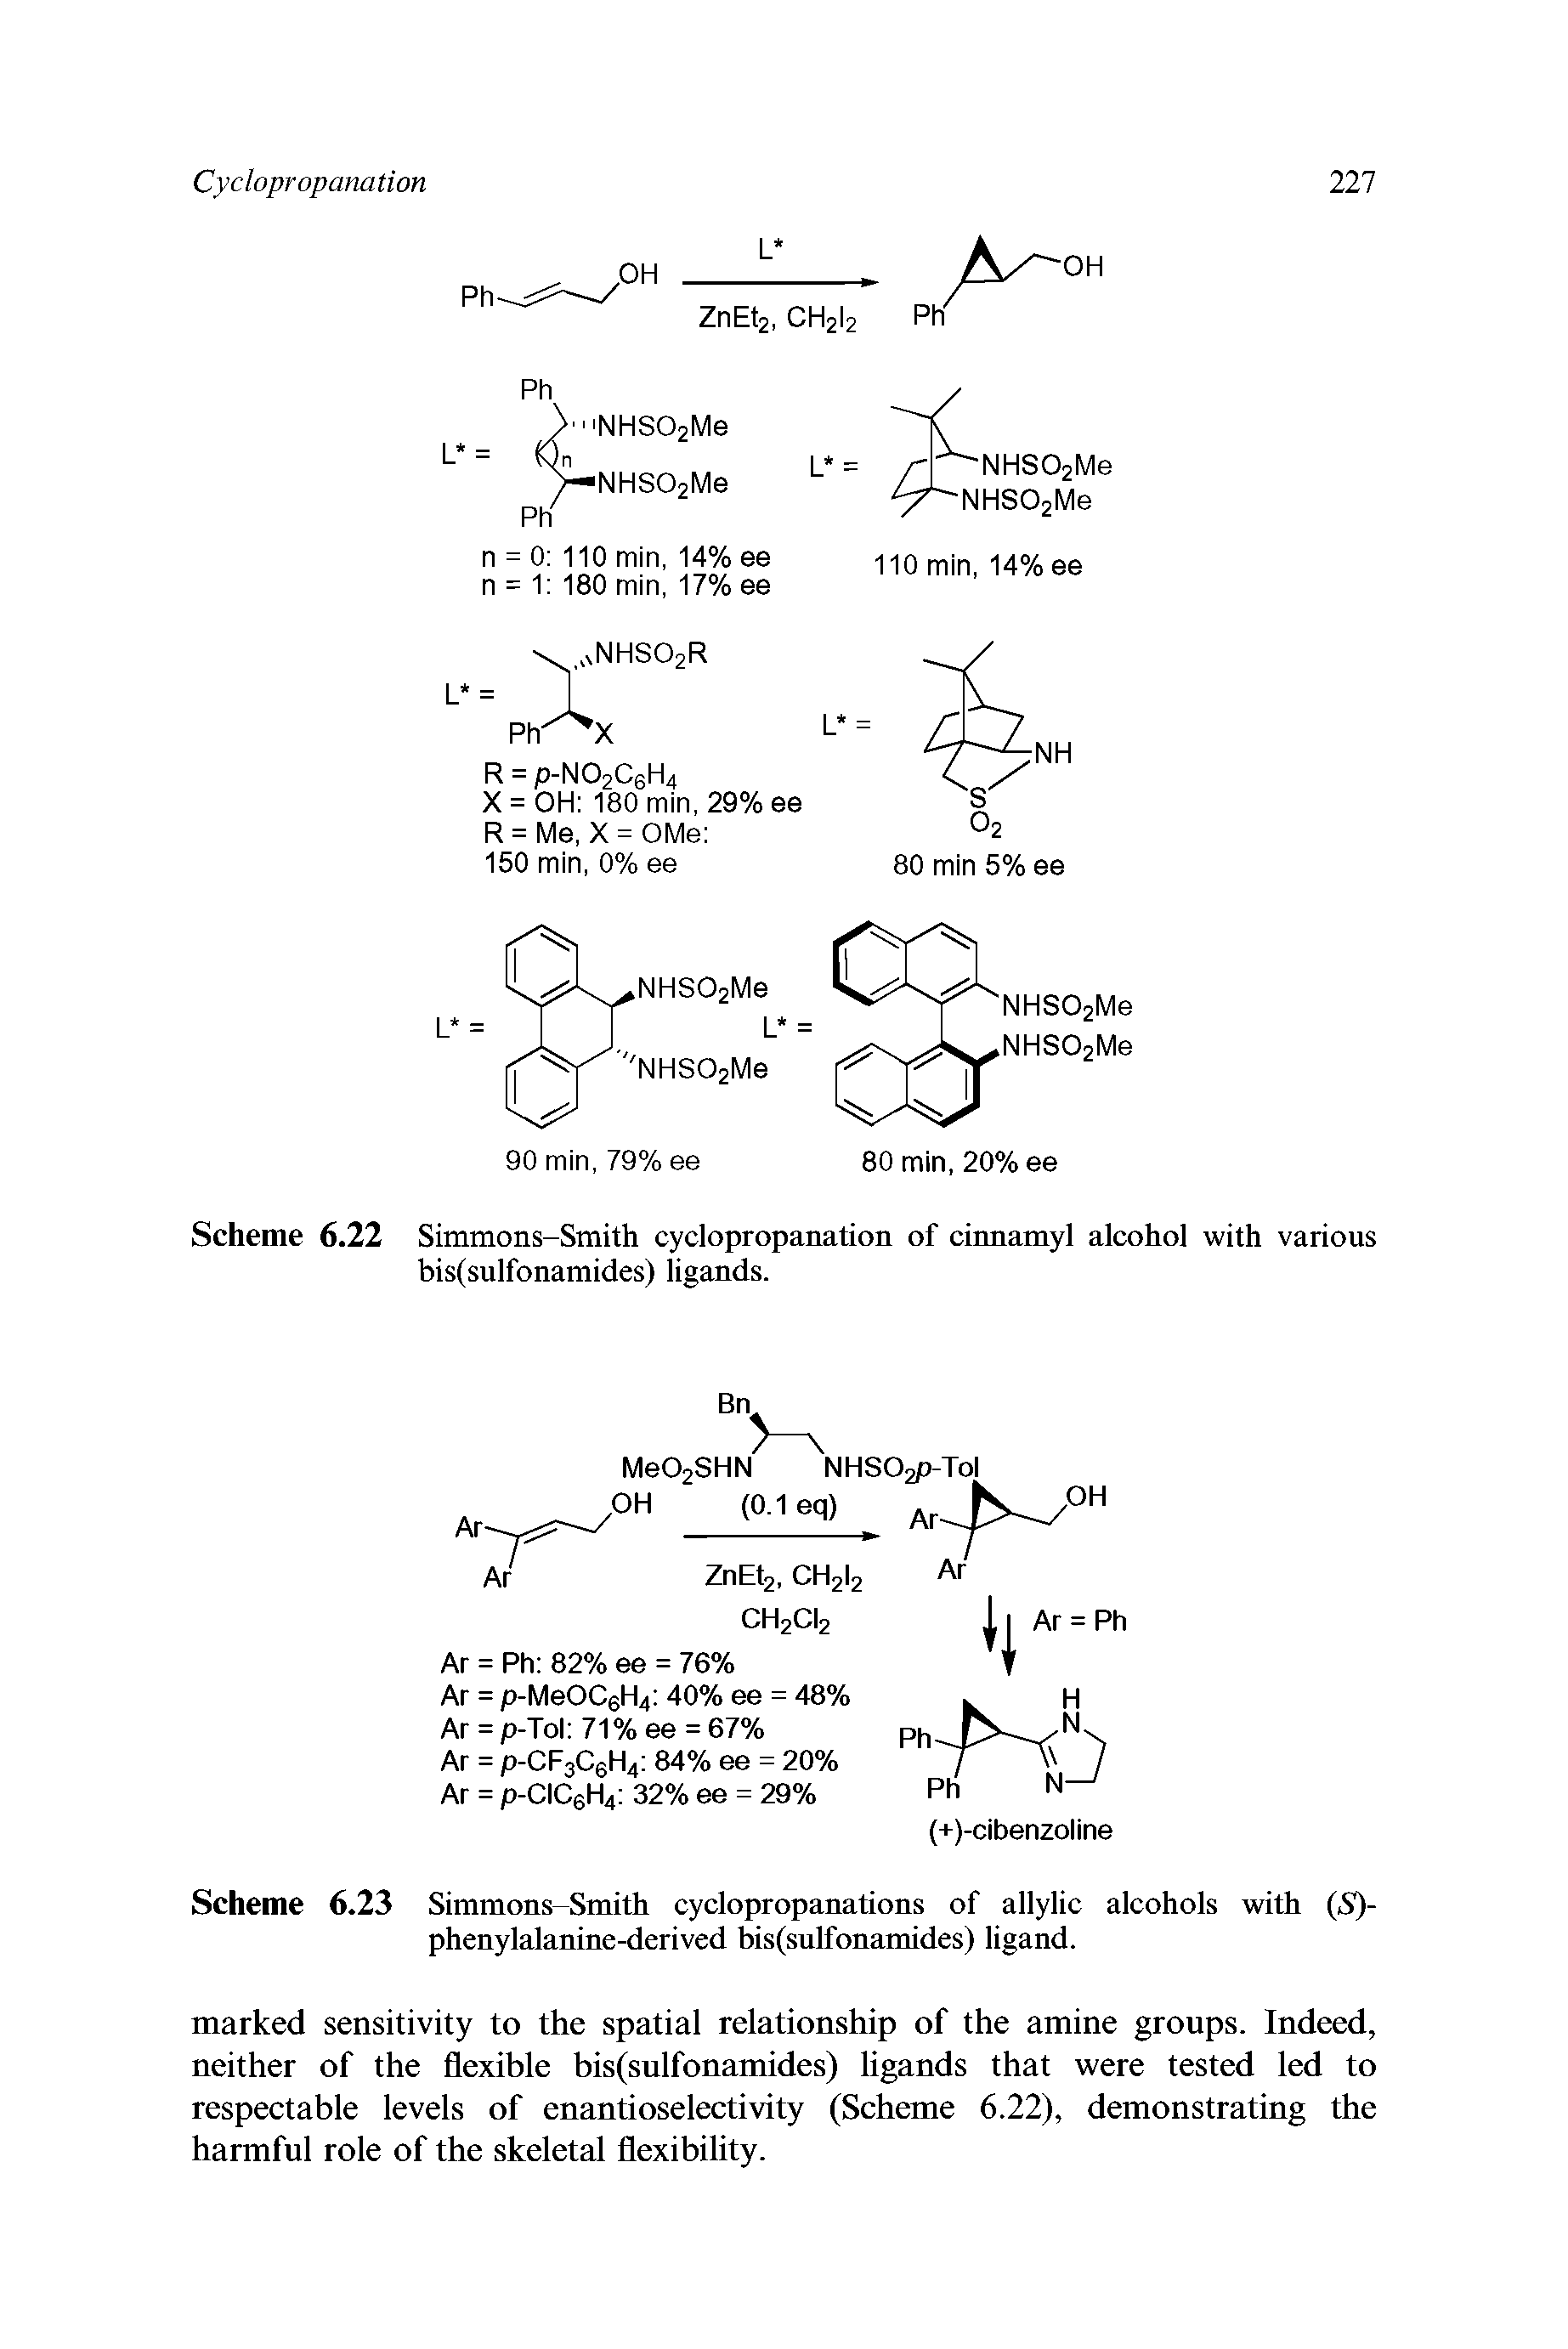 Scheme 6.23 Simmons-Smith cyclopropanations of allylic alcohols with )-phenylalanine-derived bis(sulfonamides) ligand.